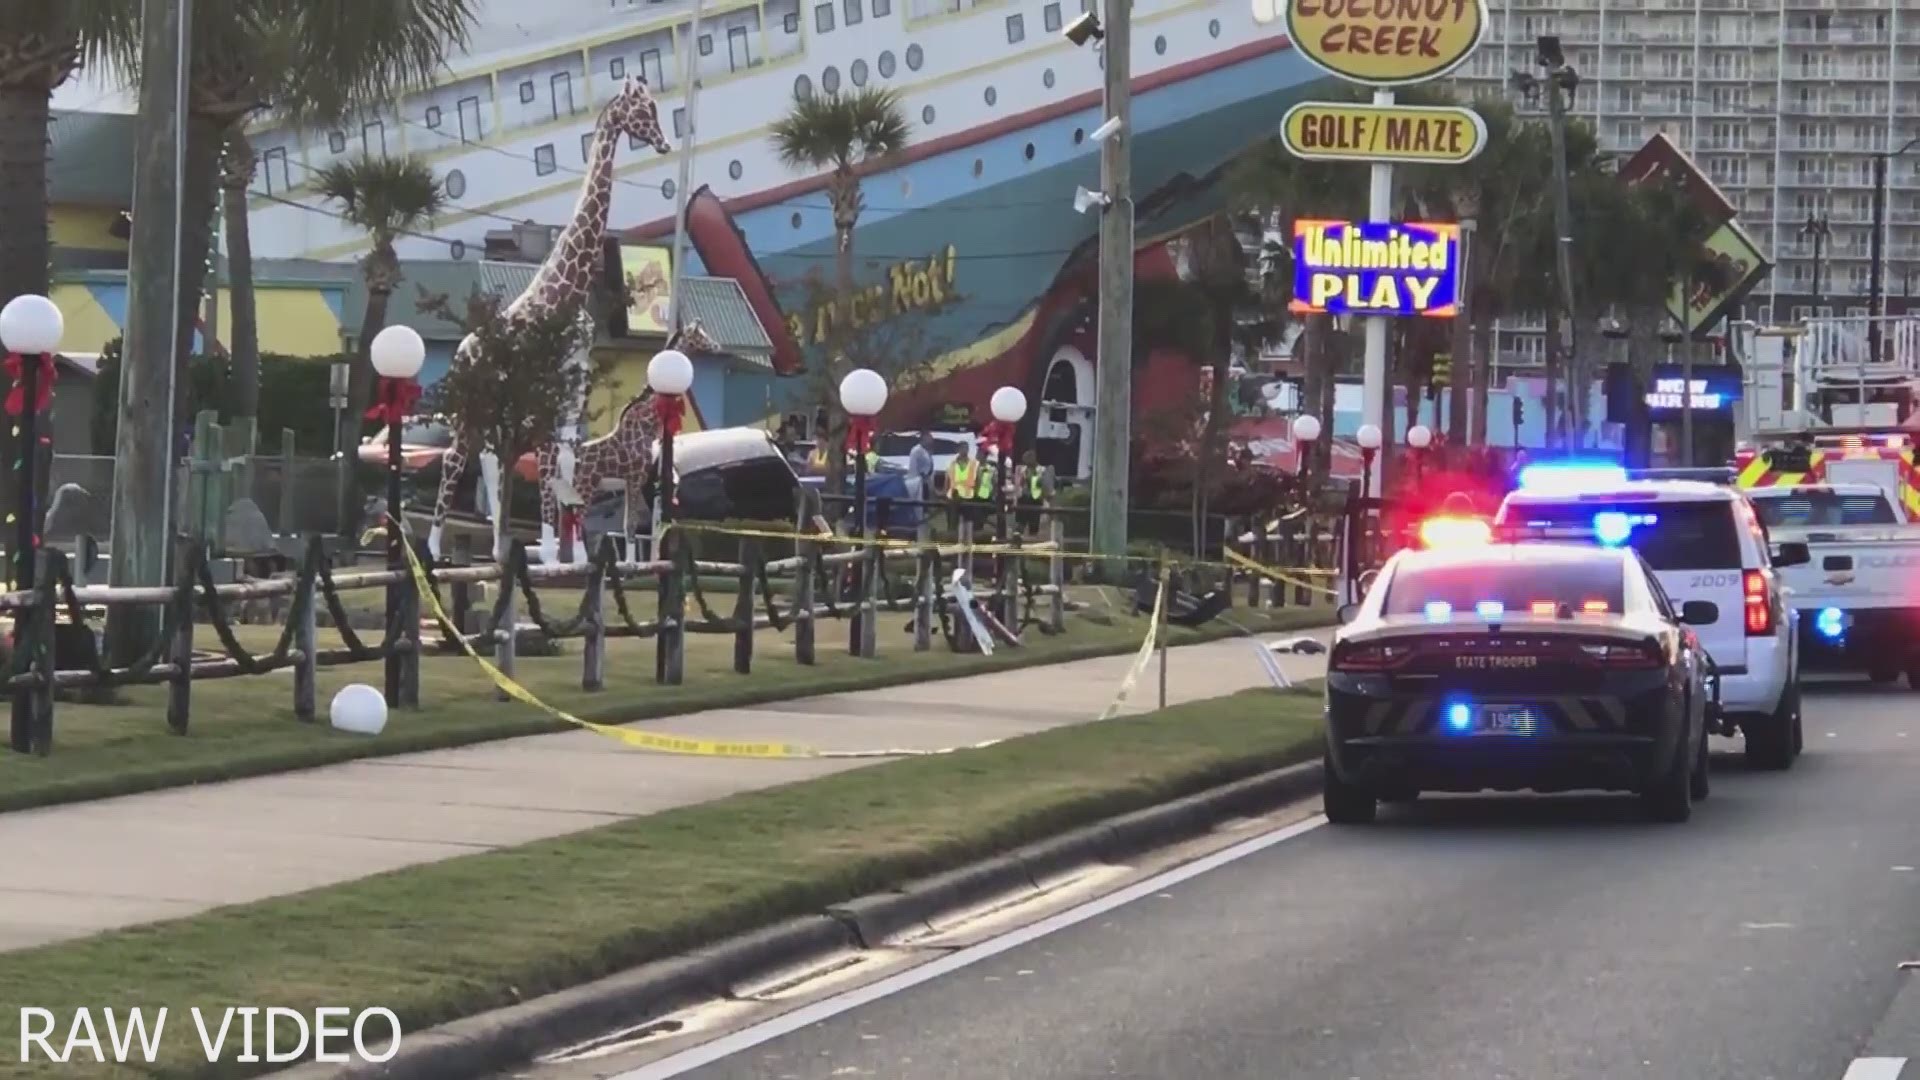 A 4-year-old boy and his 6-year-old sister were playing miniature golf in Florida when the truck hit them.